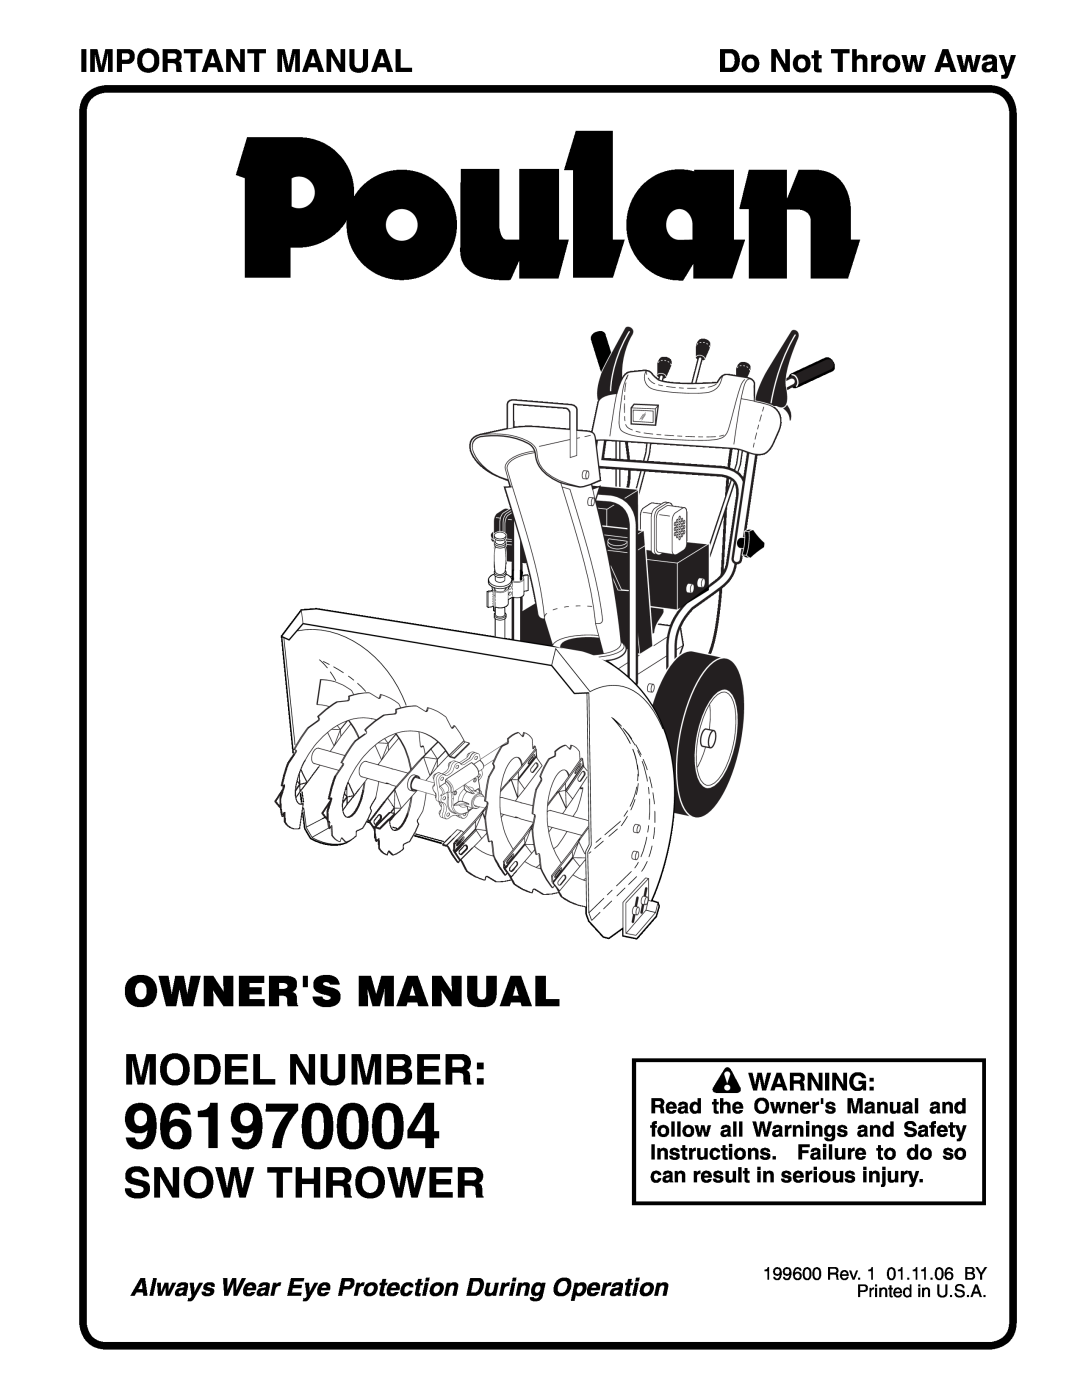 Poulan 961970004 owner manual Snow Thrower, Important Manual, Do Not Throw Away 